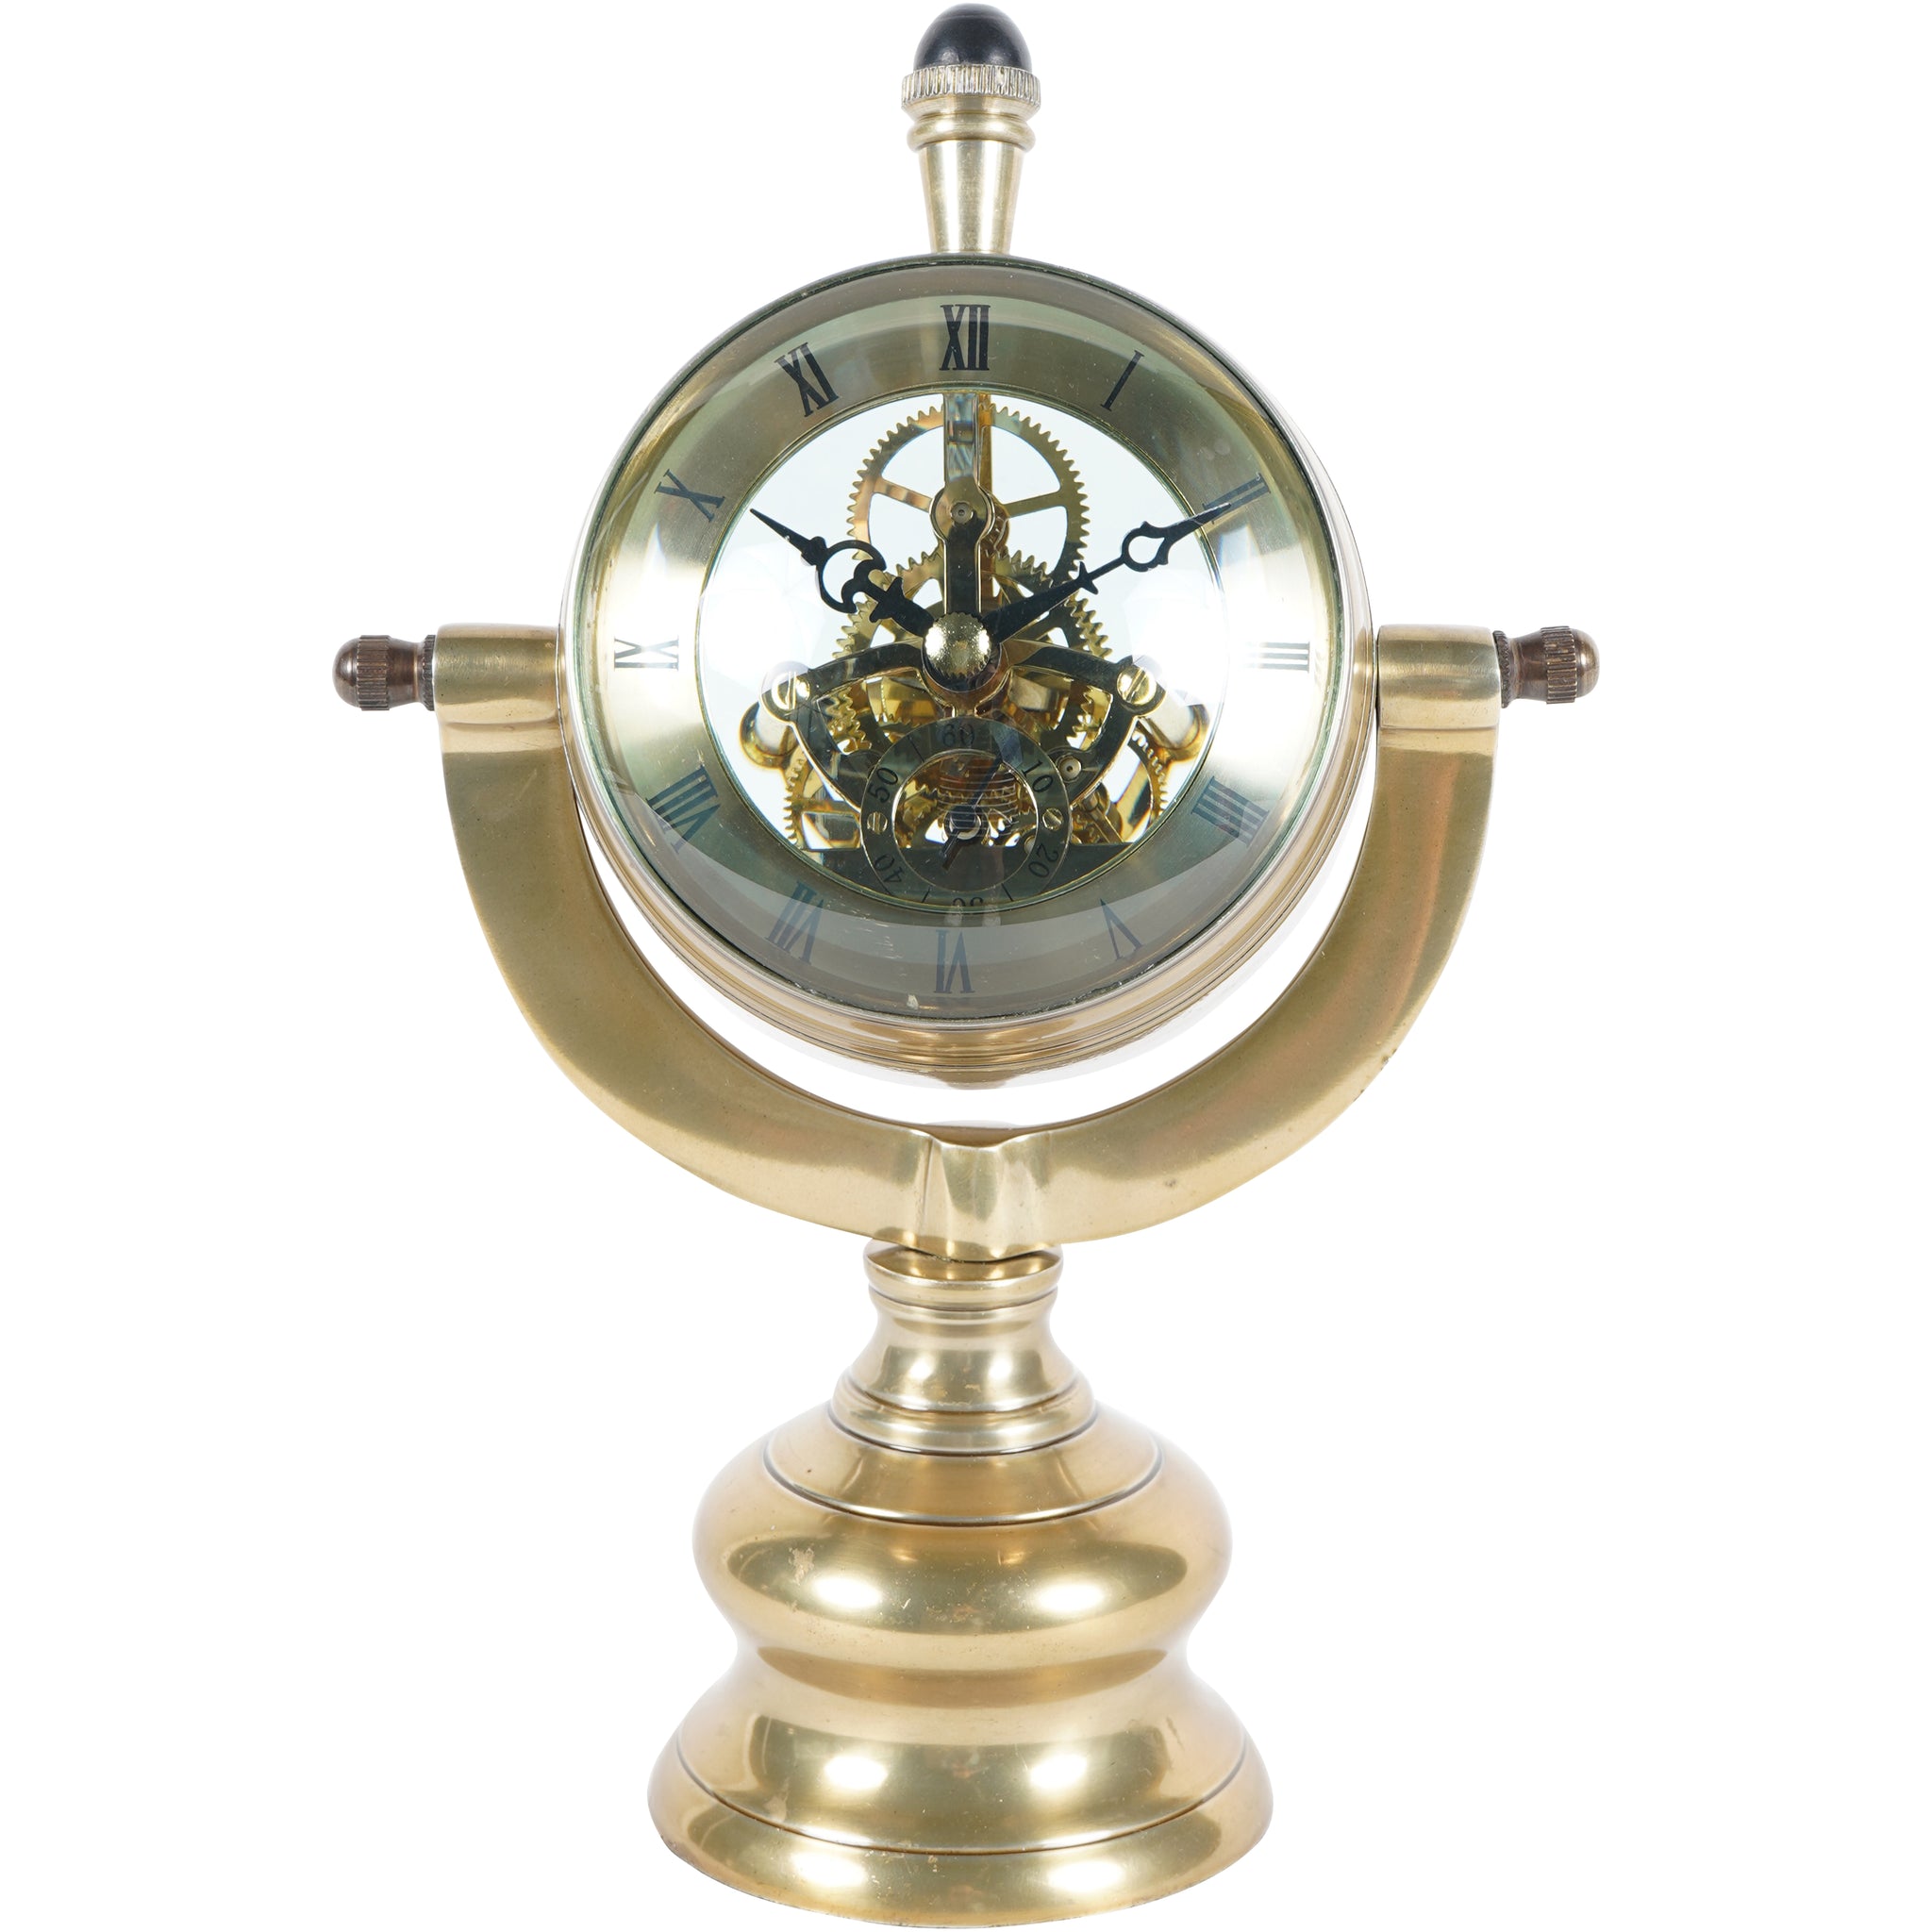 Colombo Antique Brass Finish Mantle Clock